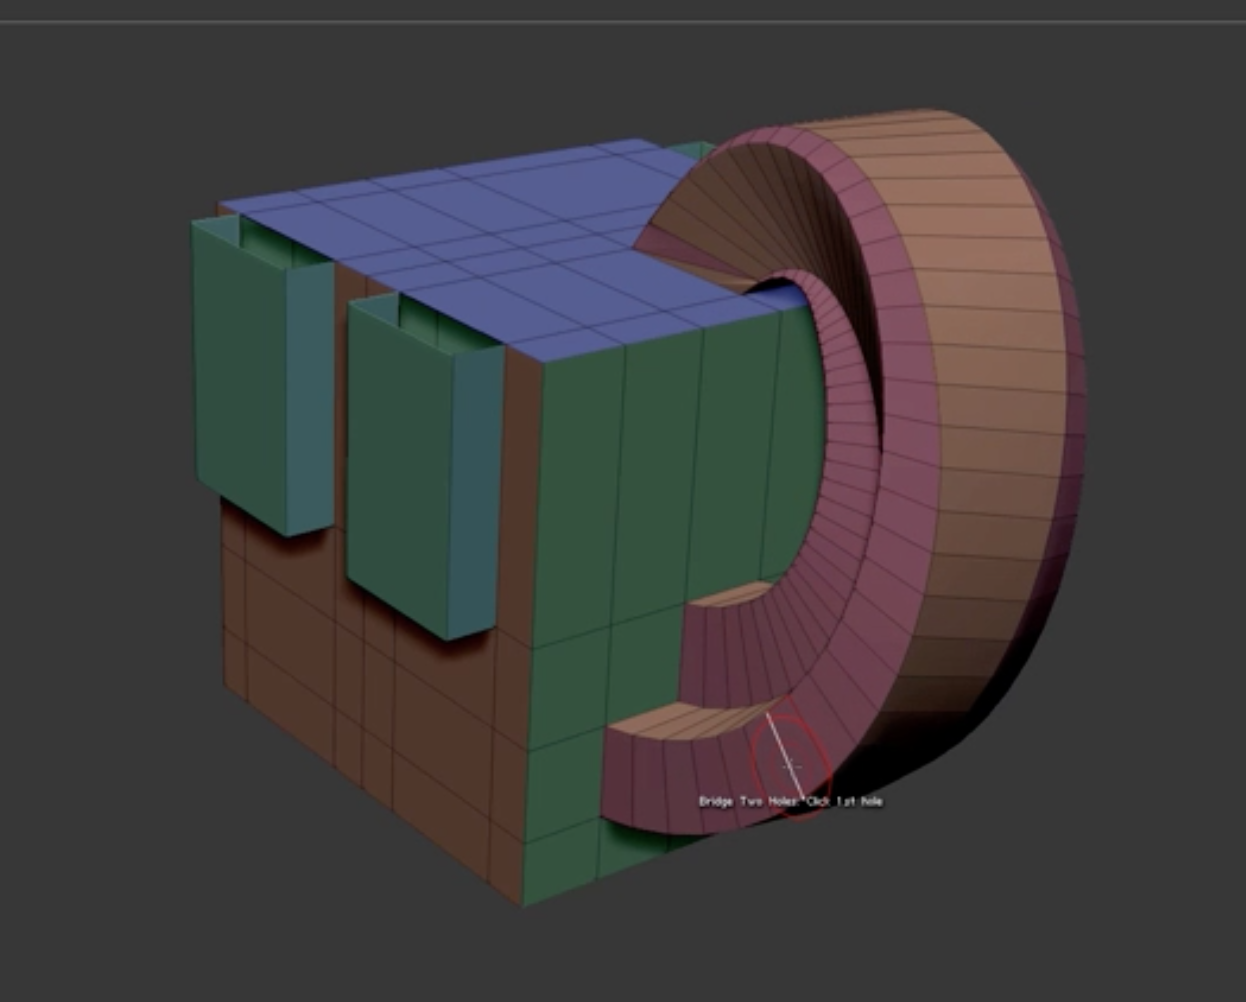 why zbrush wont split ring center poitn of cylidner